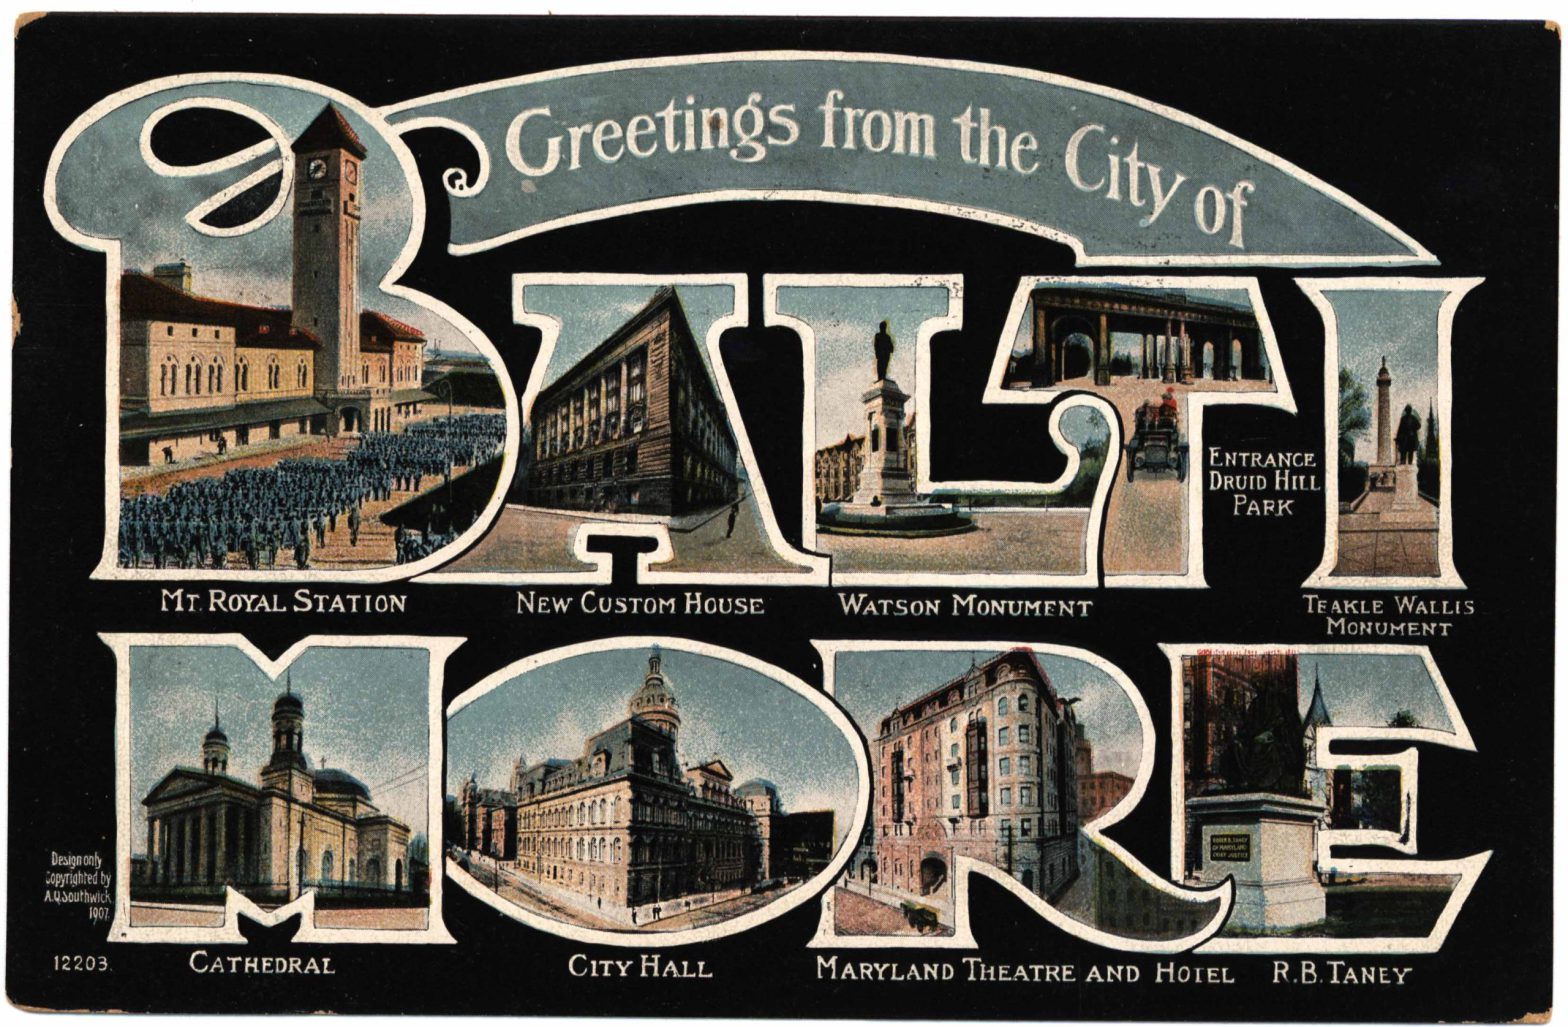 "Greetings from Baltimore" — Picture postcards with multiple images of Baltimore often framed within the letters B-A-L-T-I-M-O-R-E.